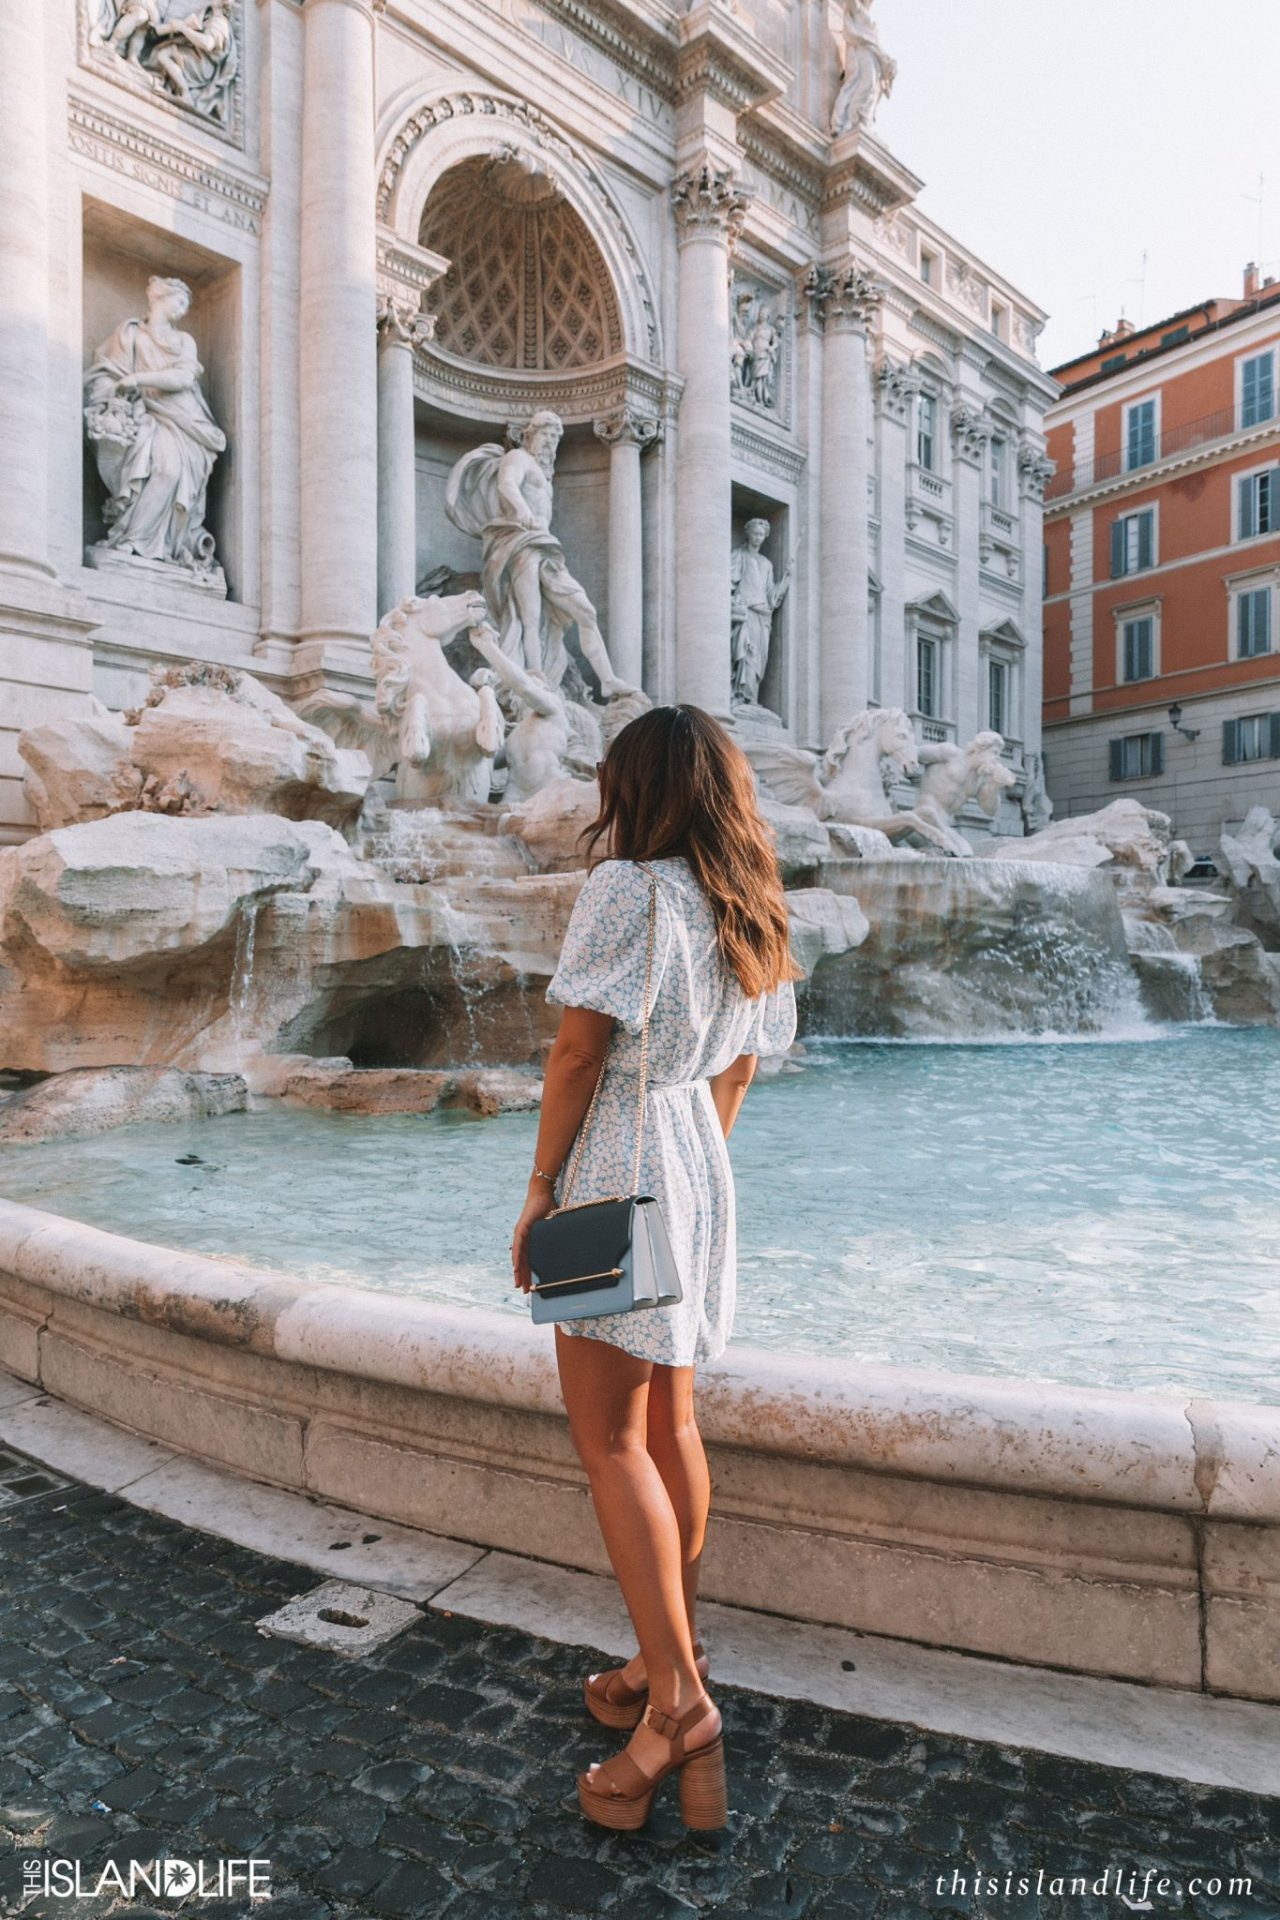 Girl sightseeing at Trevi Fountain in Rome